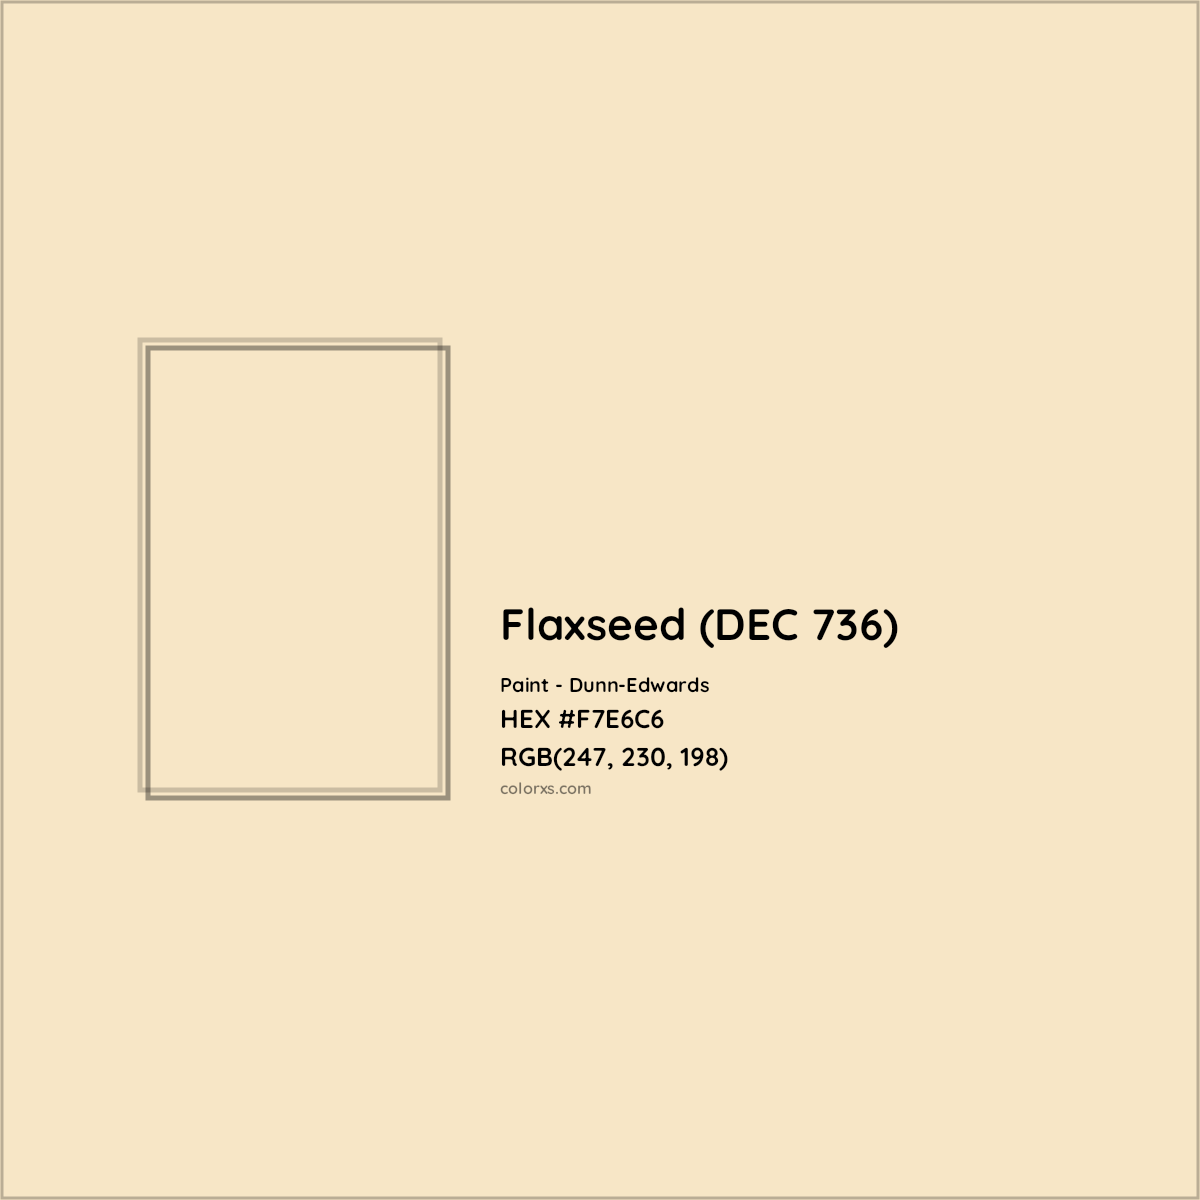 HEX #F7E6C6 Flaxseed (DEC 736) Paint Dunn-Edwards - Color Code